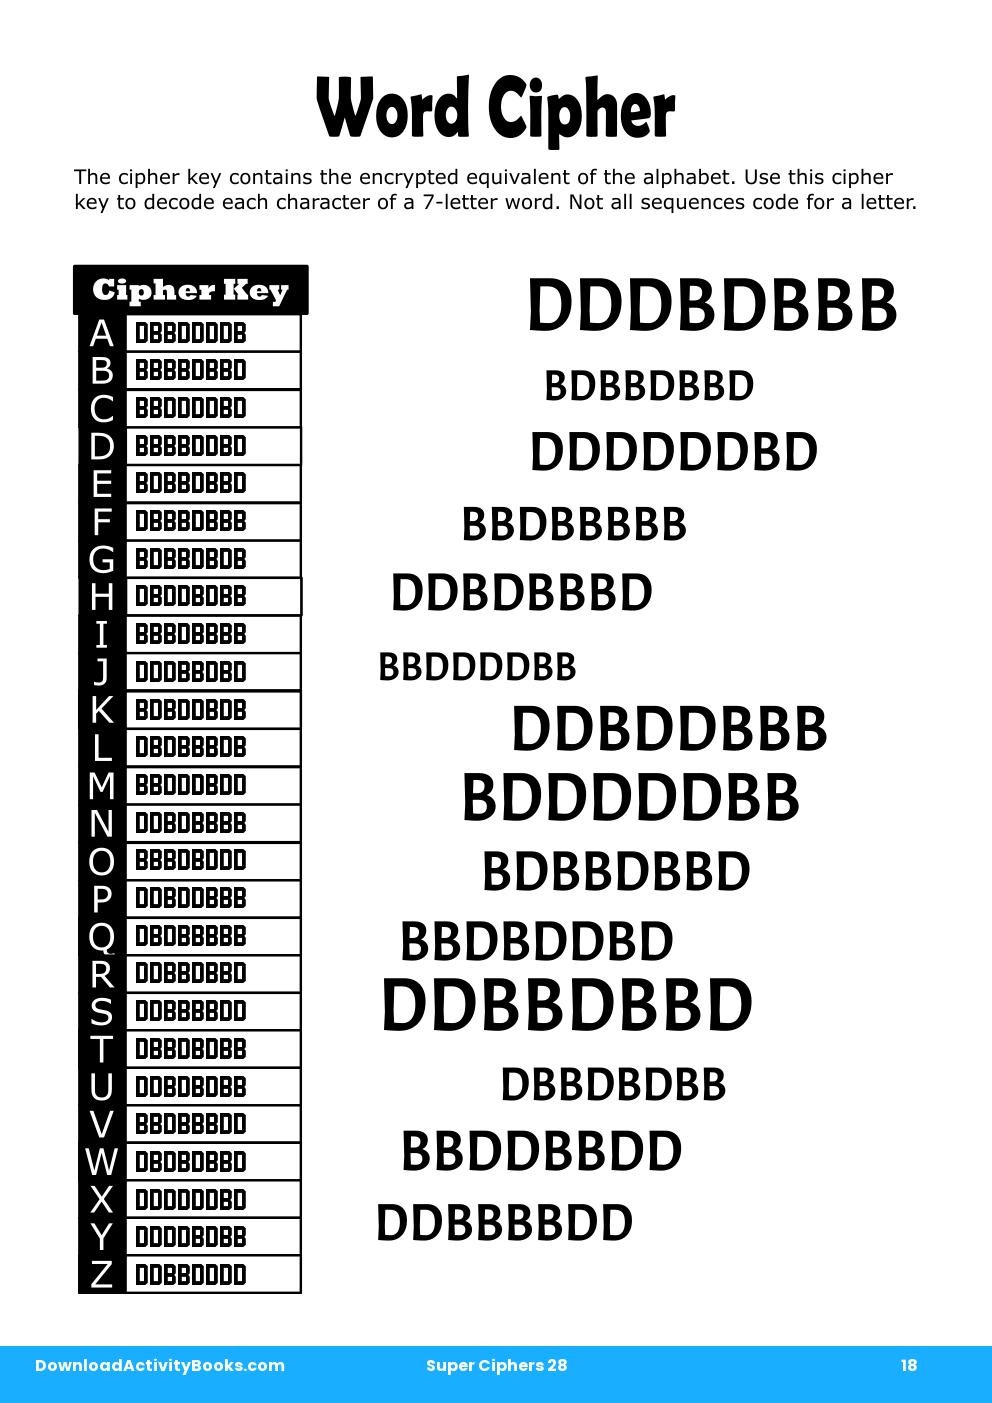 Word Cipher in Super Ciphers 28